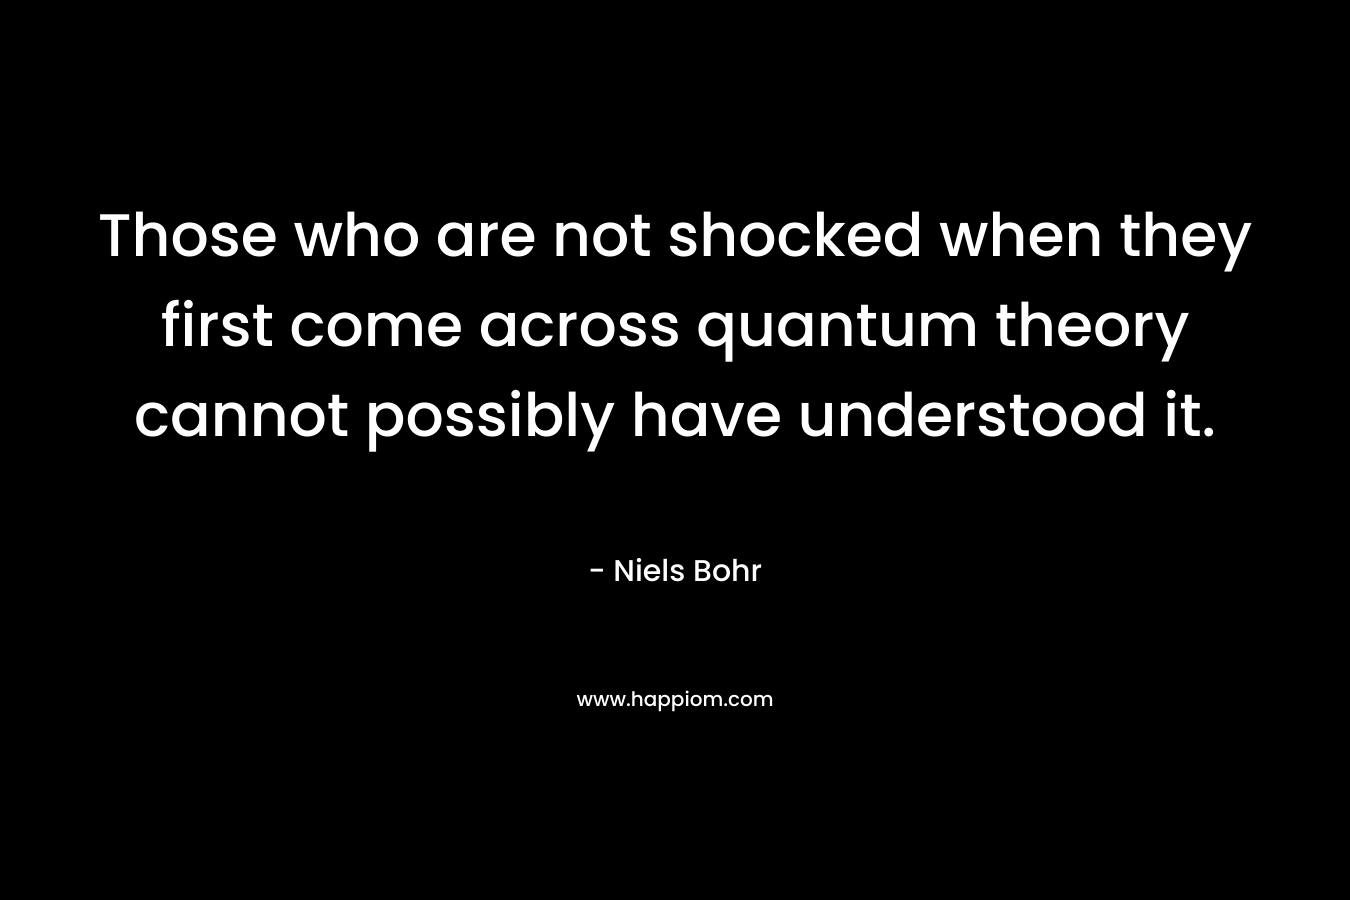 Those who are not shocked when they first come across quantum theory cannot possibly have understood it. – Niels Bohr